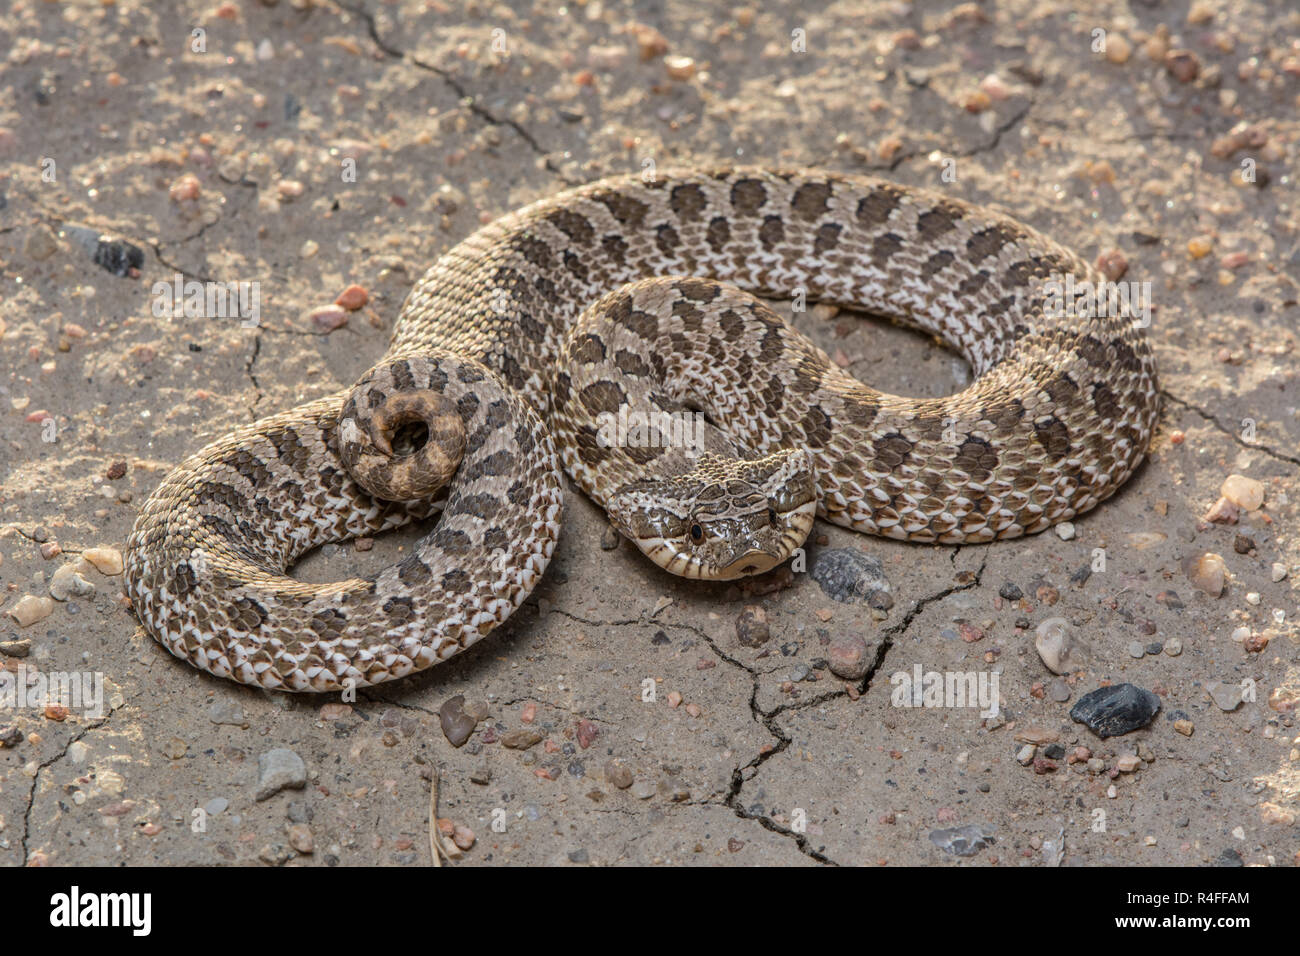 Plains Hog-nosed Snake (Heterodon nasicus) from Prowers County, Colorado, USA. Stock Photo